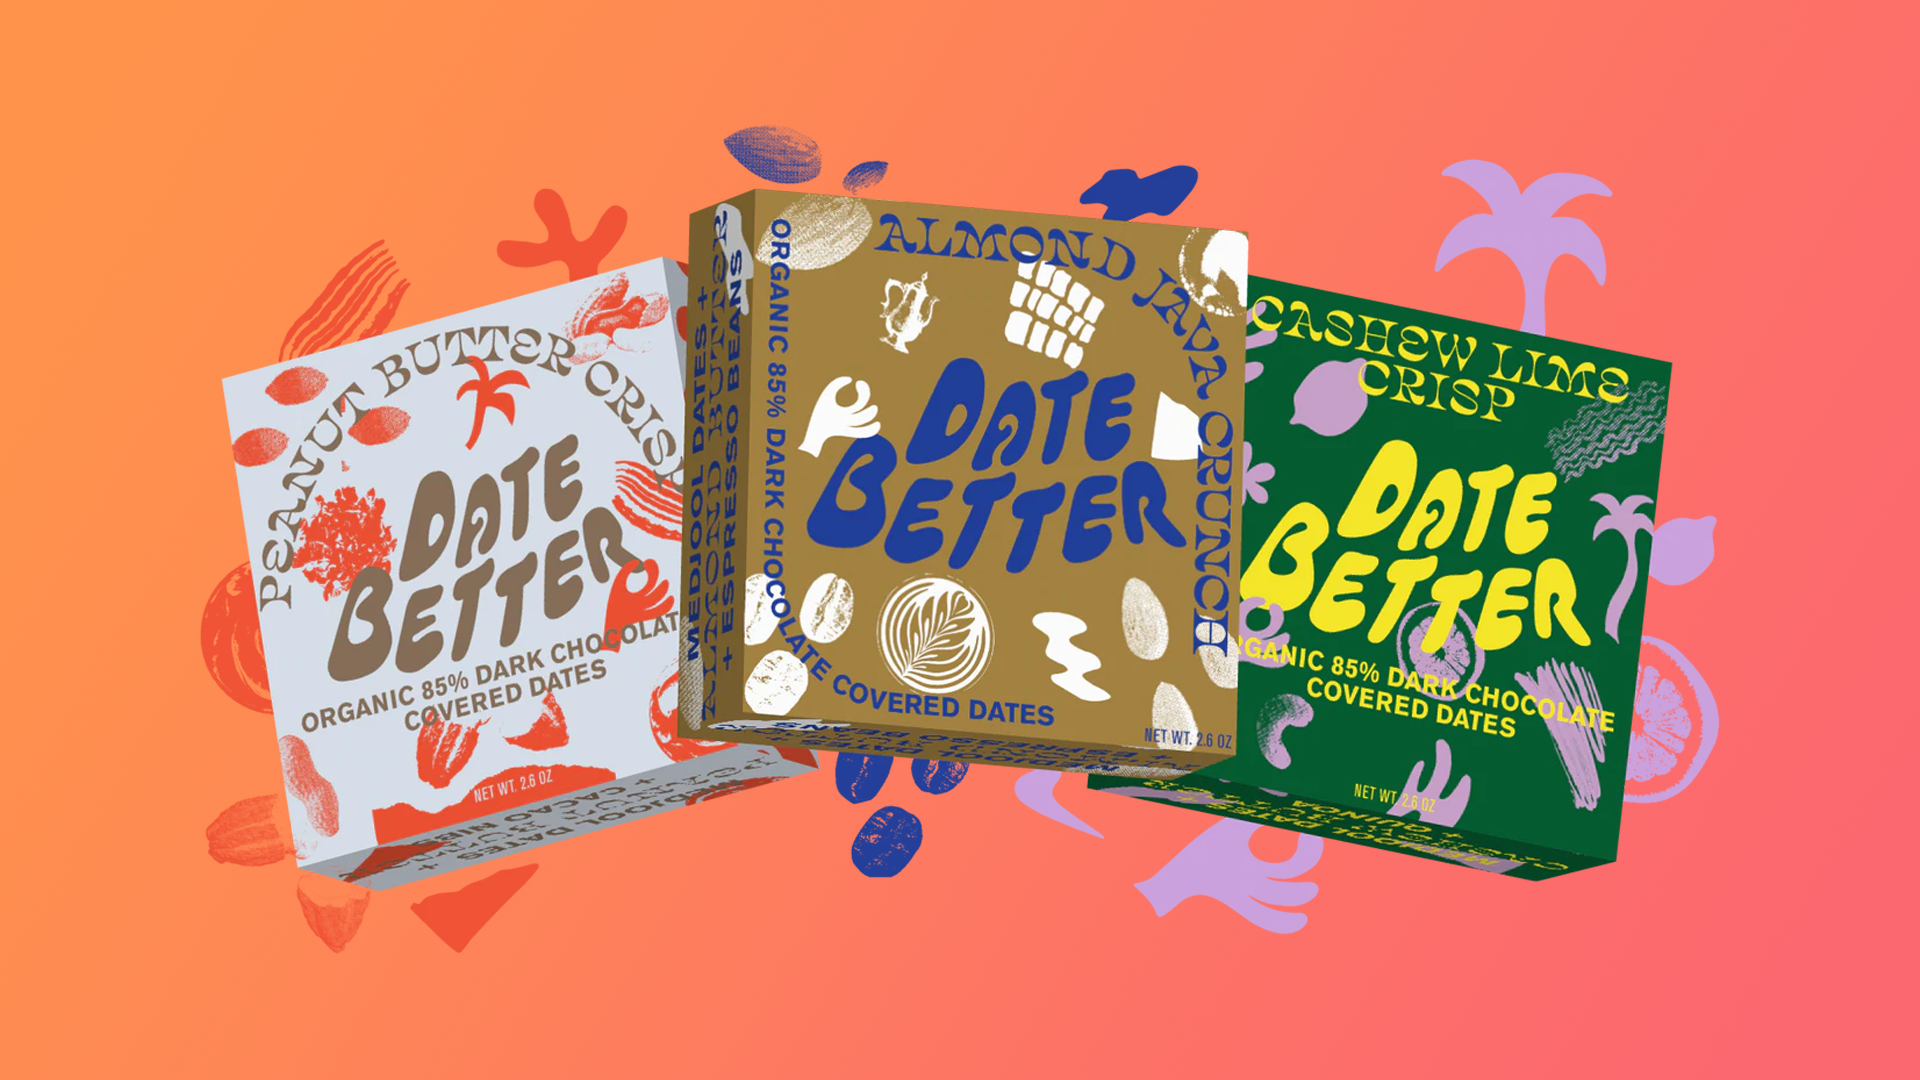 Julianna Bach-Designed Date Better Is as Sweet as the Brand’s Snacks